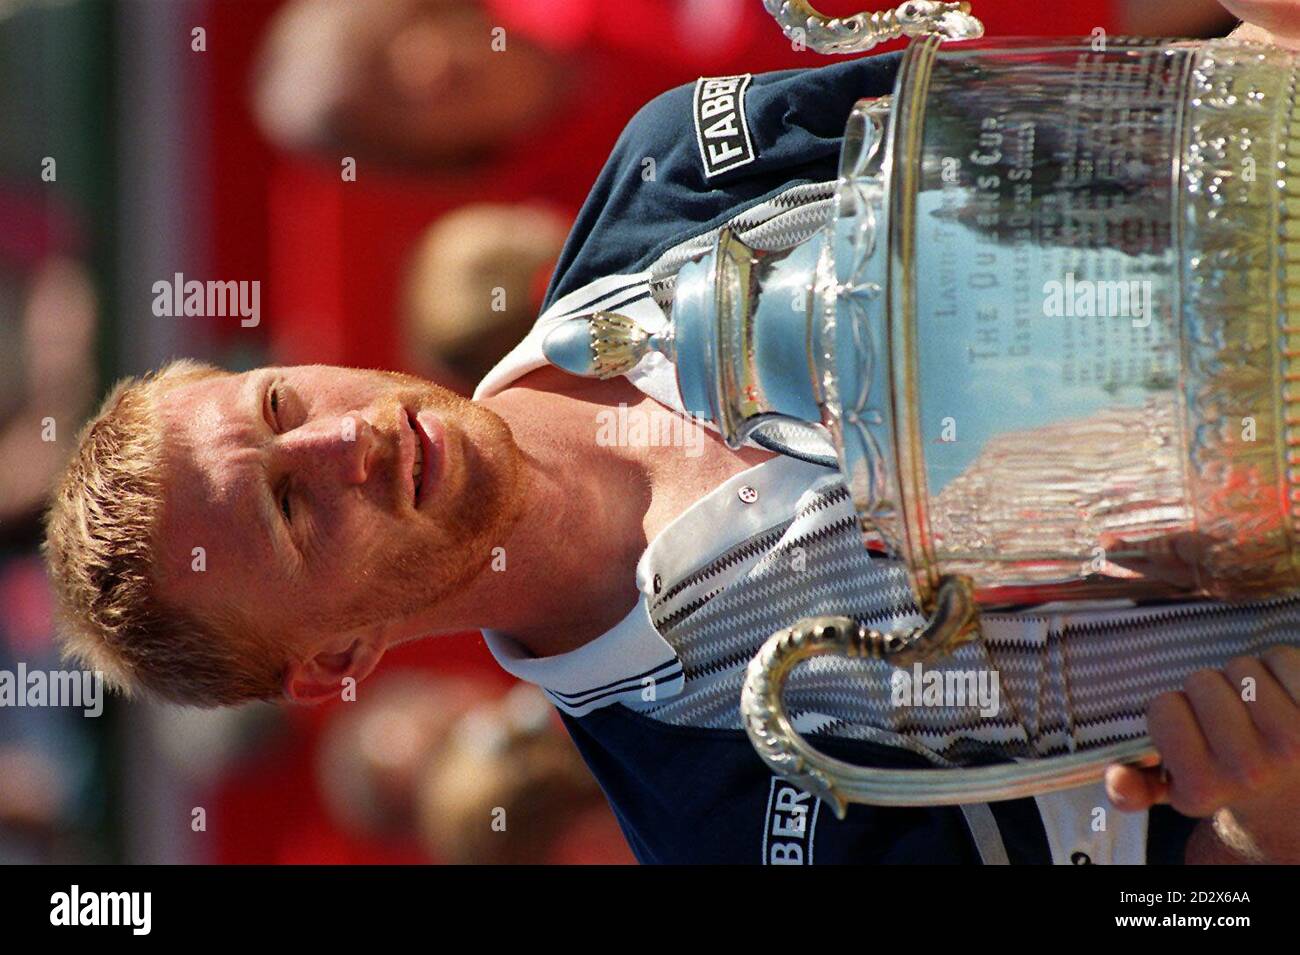 Germany's Boris Becker (D.O.B. 22/11/67) with the Stella Artois Trophy after defeating Sweden's Stefan Edberg in the final of the Grass Court Championships at The Queens Club today (Sunday). Photo by Neil Munns/PA Stock Photo